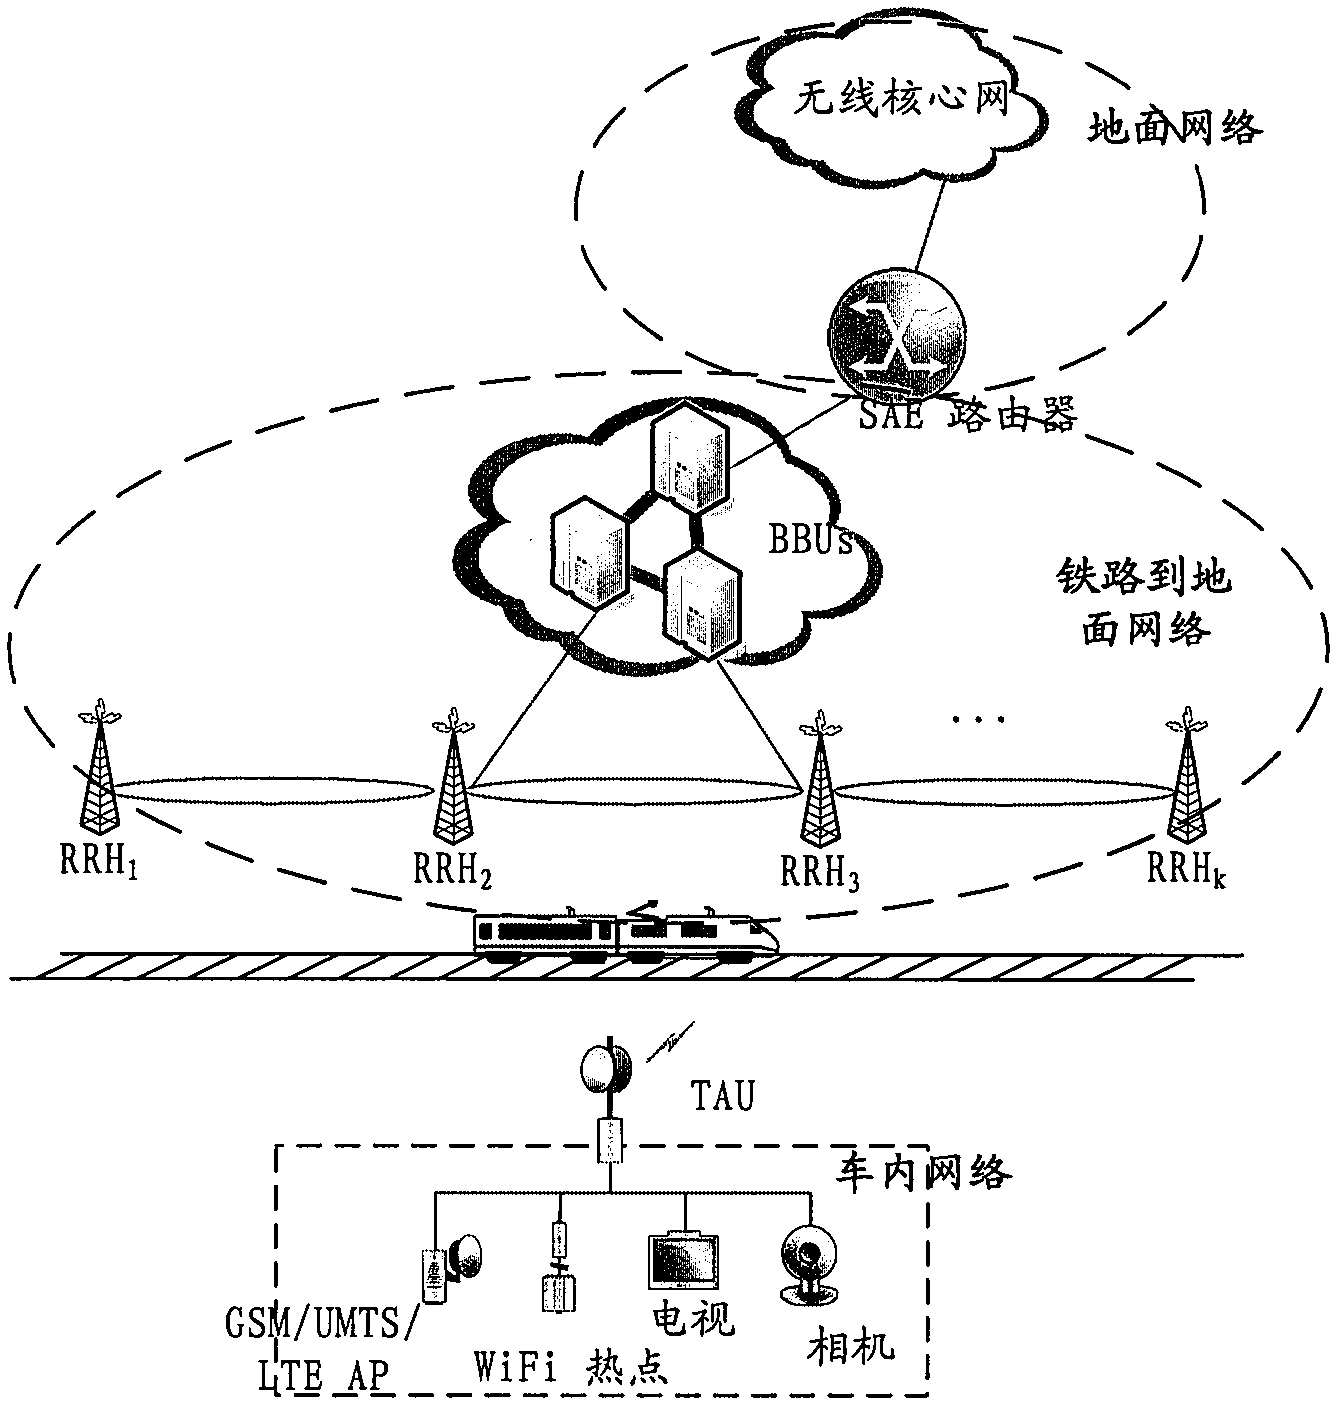 Method for achieving continuous broadband communication